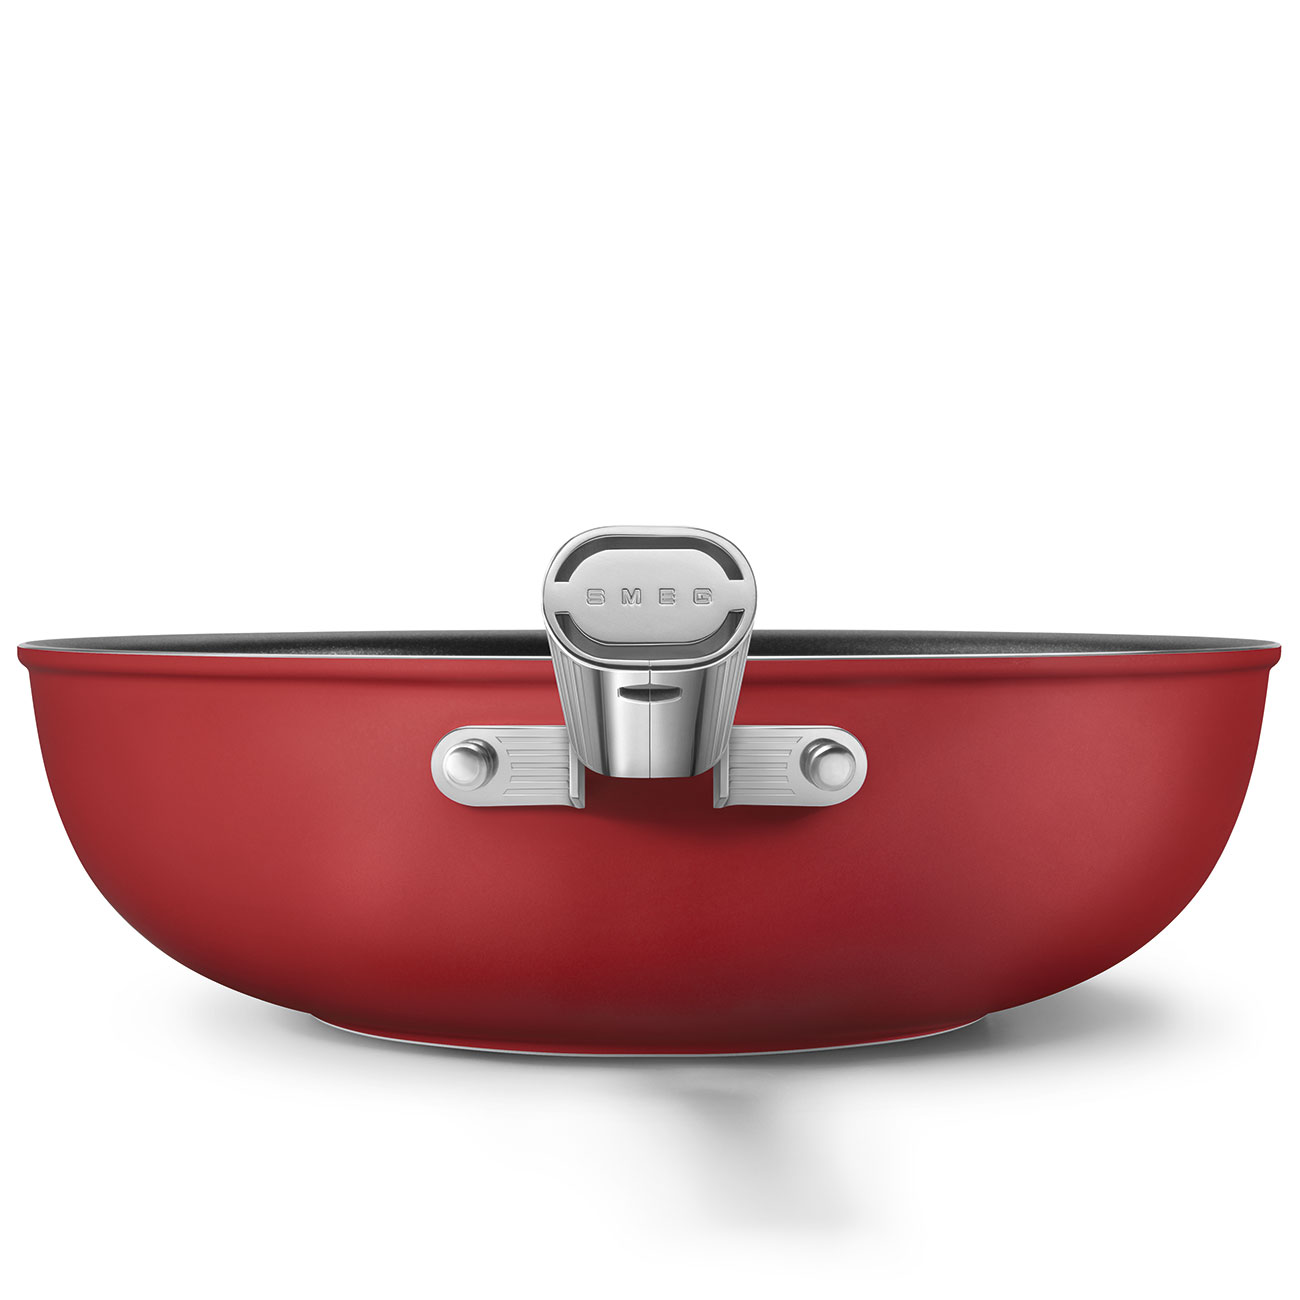 Smeg Red Non-stick Wok with Stainless Steel Handle - CKFW3001RDM_5